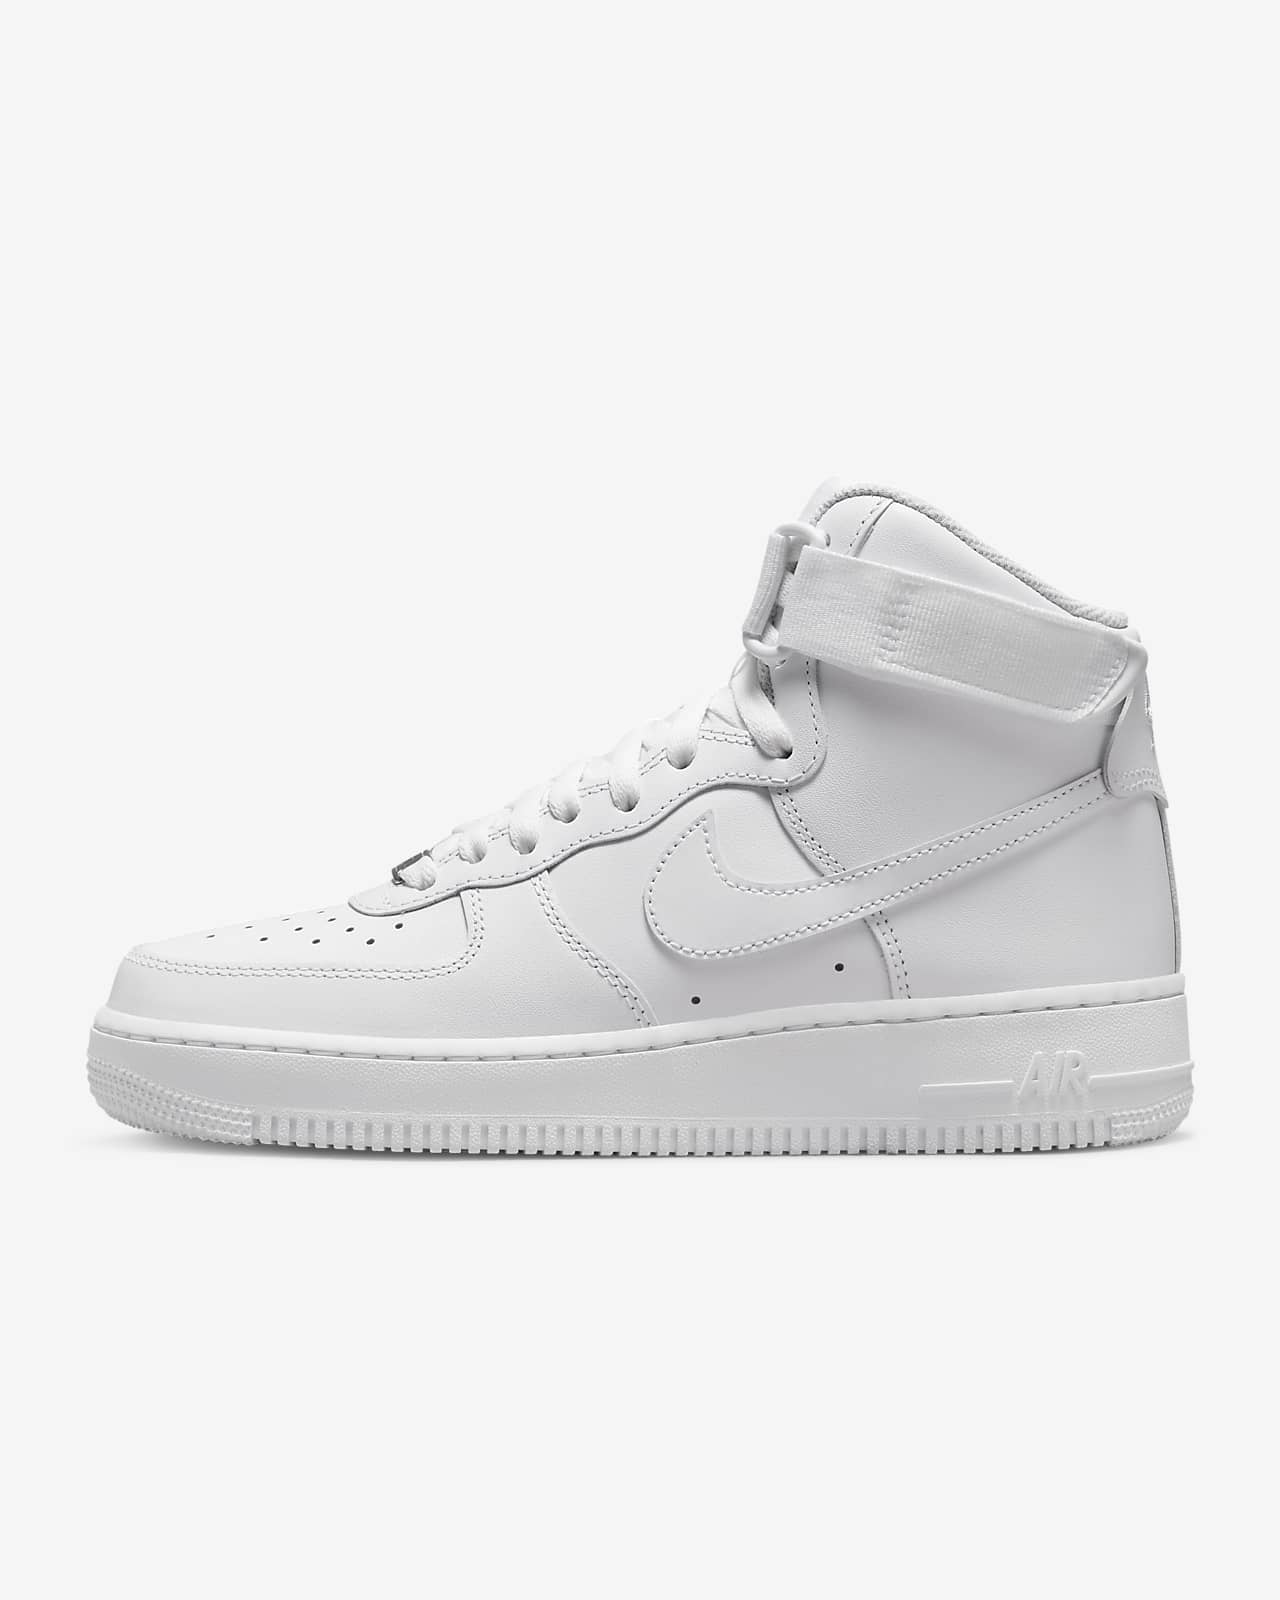 President Thoughtful Challenge Nike Air Force 1 High Women's Shoes. Nike JP